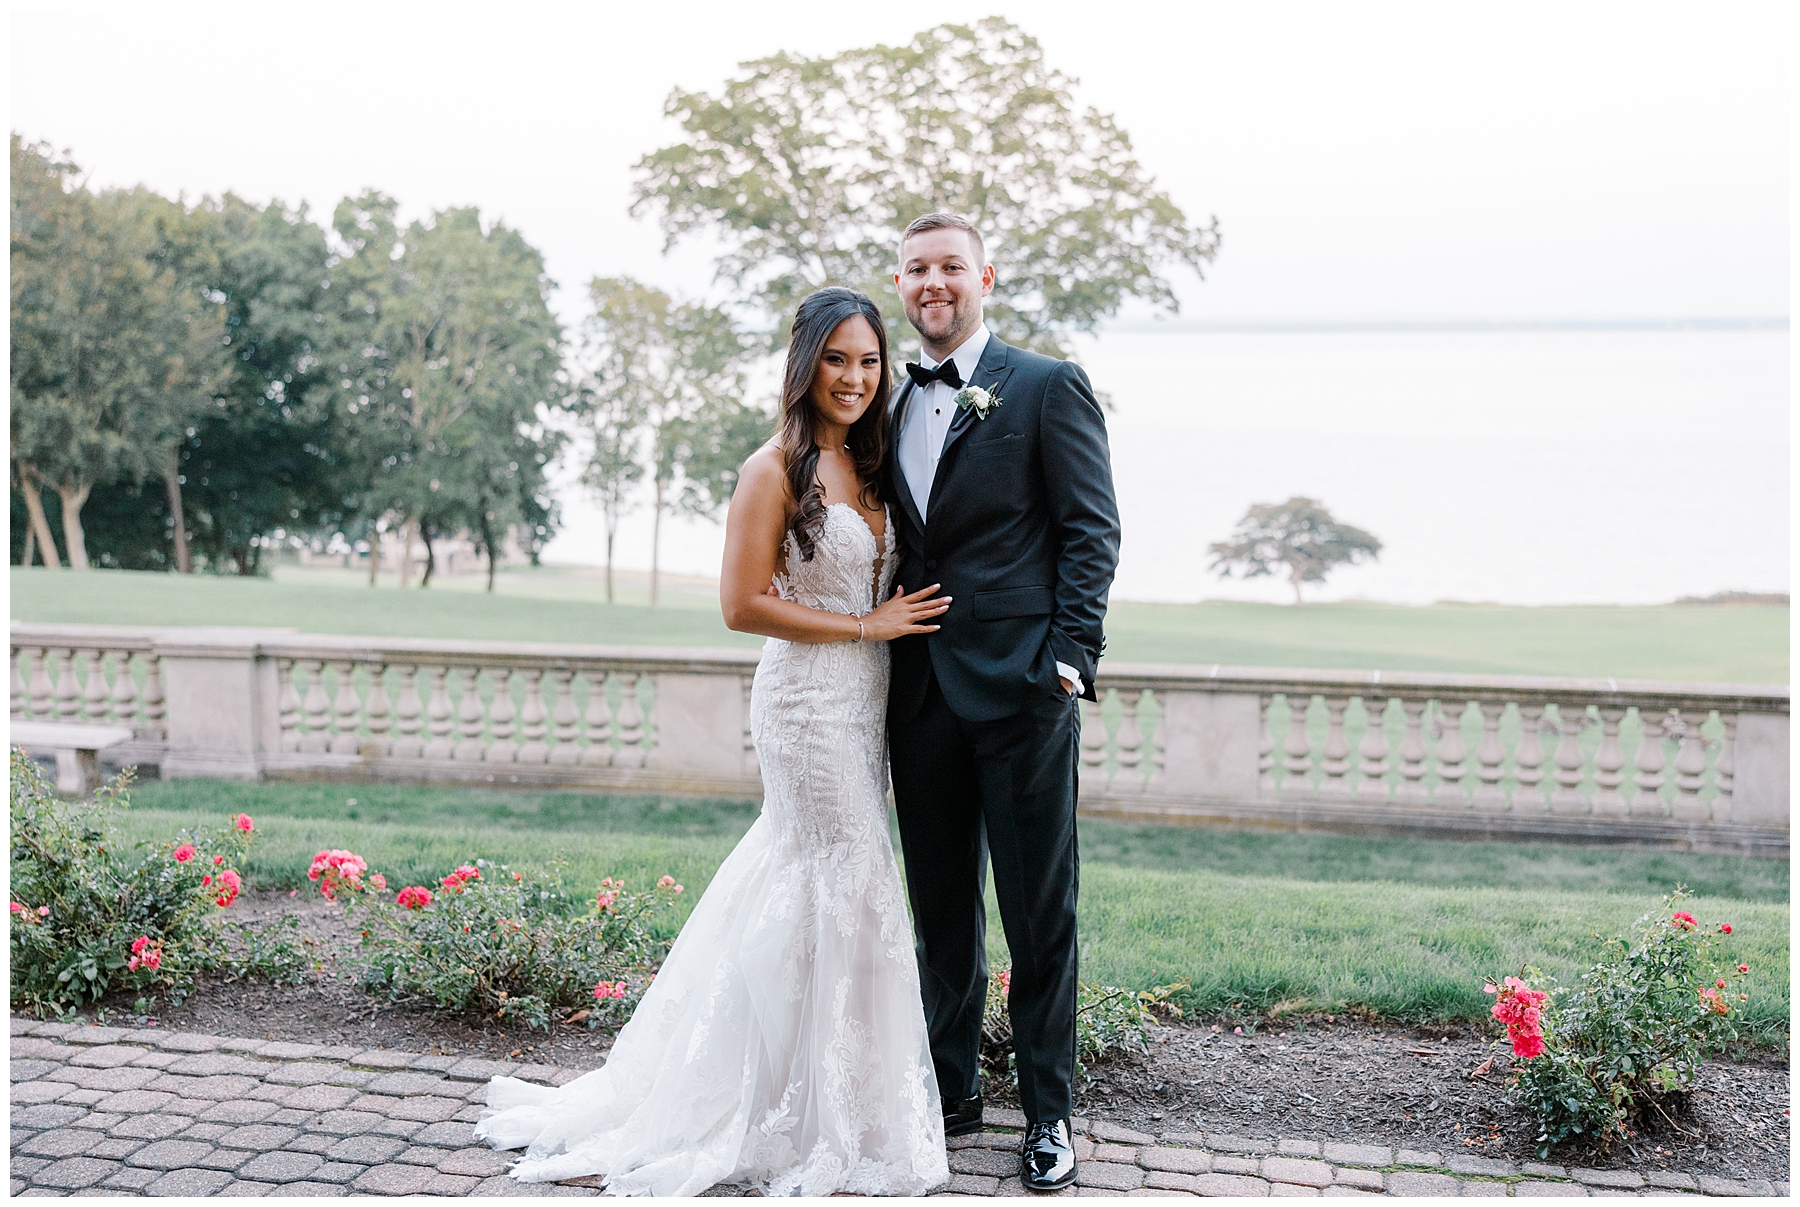 Romantic wedding portraits by the waters in Rhode Island 